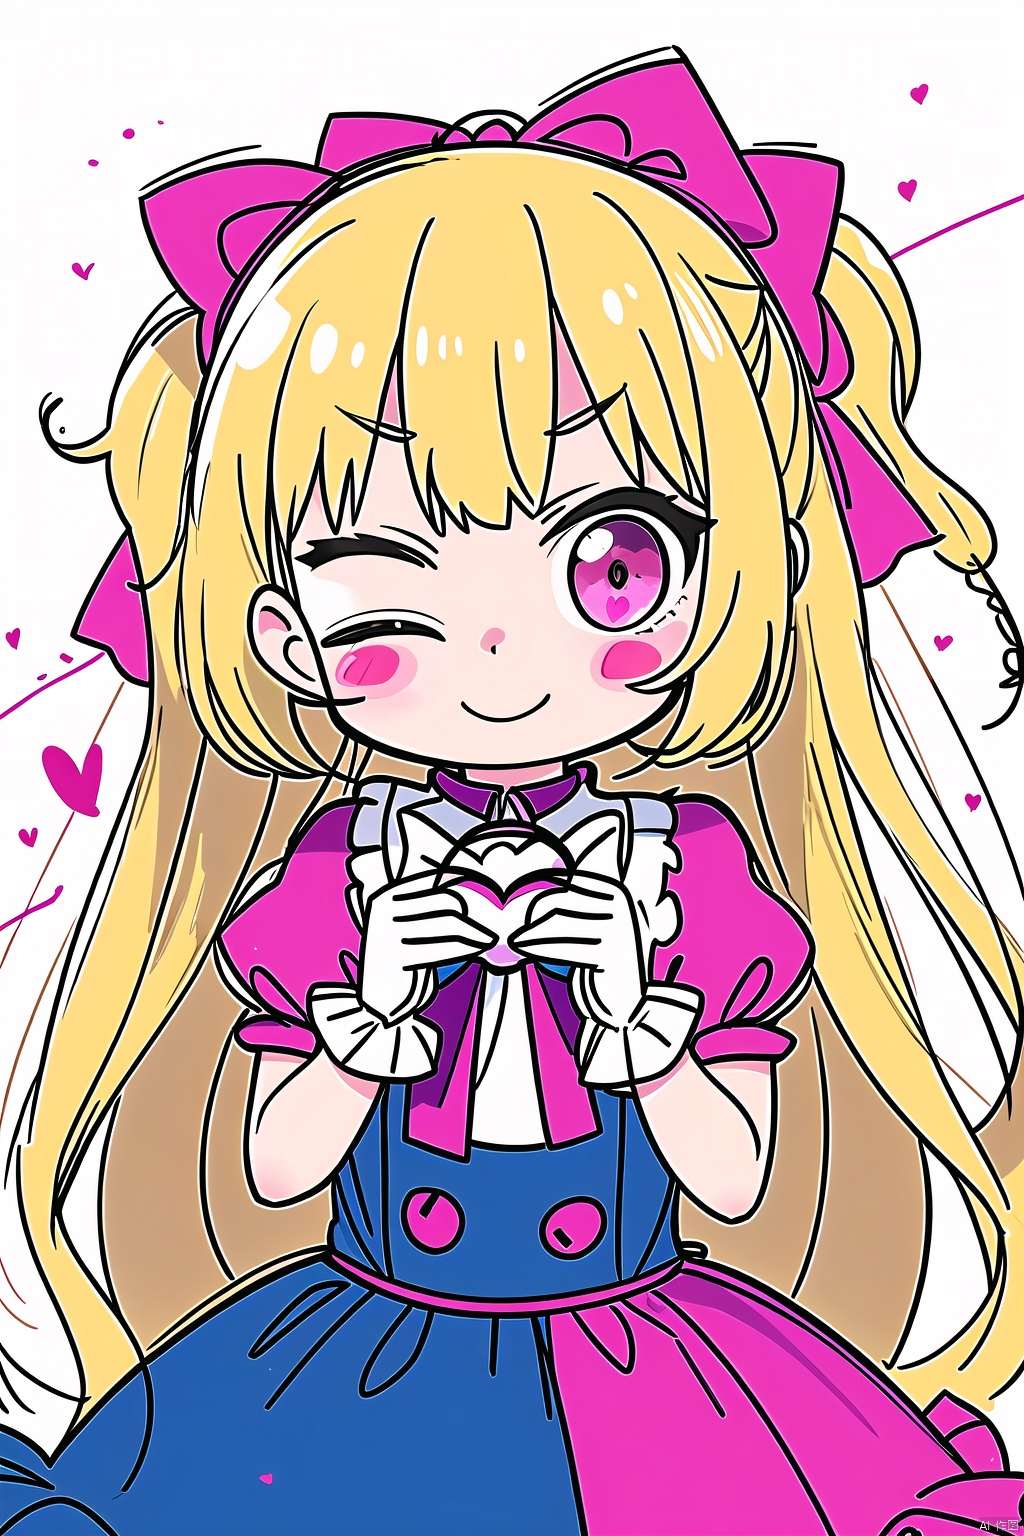  1girl, artist_name, balloon, bangs, blonde_hair, blush, bow, closed_mouth, dress, eyebrows_visible_through_hair, frills, gloves, heart, heart_balloon, heart_pillow, holding, long_hair, looking_at_viewer, one_eye_closed, pink_bow, simple_background, smile, solo, very_long_hair, white_background, masterpiece, Cluttered lines